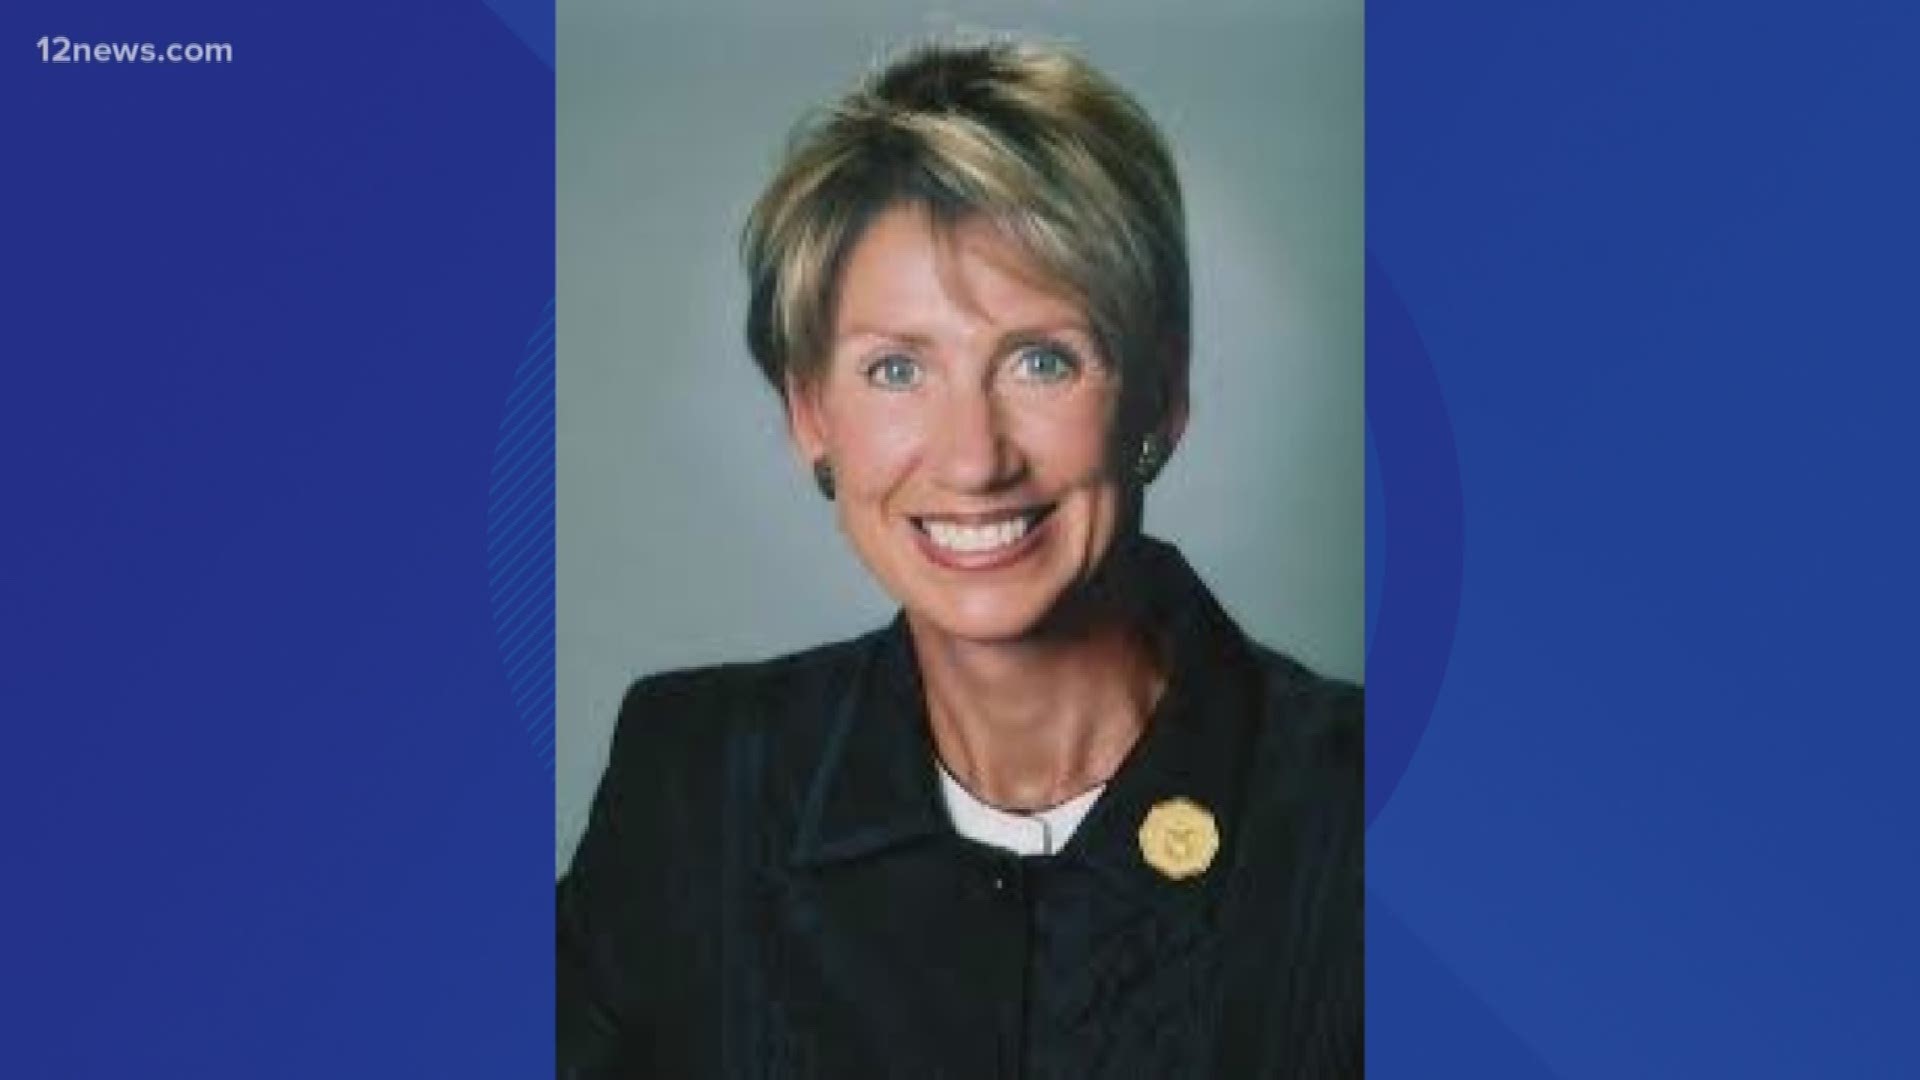 President Trump tweeted Barbara Barrett's name as his nominee for Secretary of the U.S. Air Force Tuesday afternoon. Barret is a former ambassador and Arizona gubernatorial candidate.